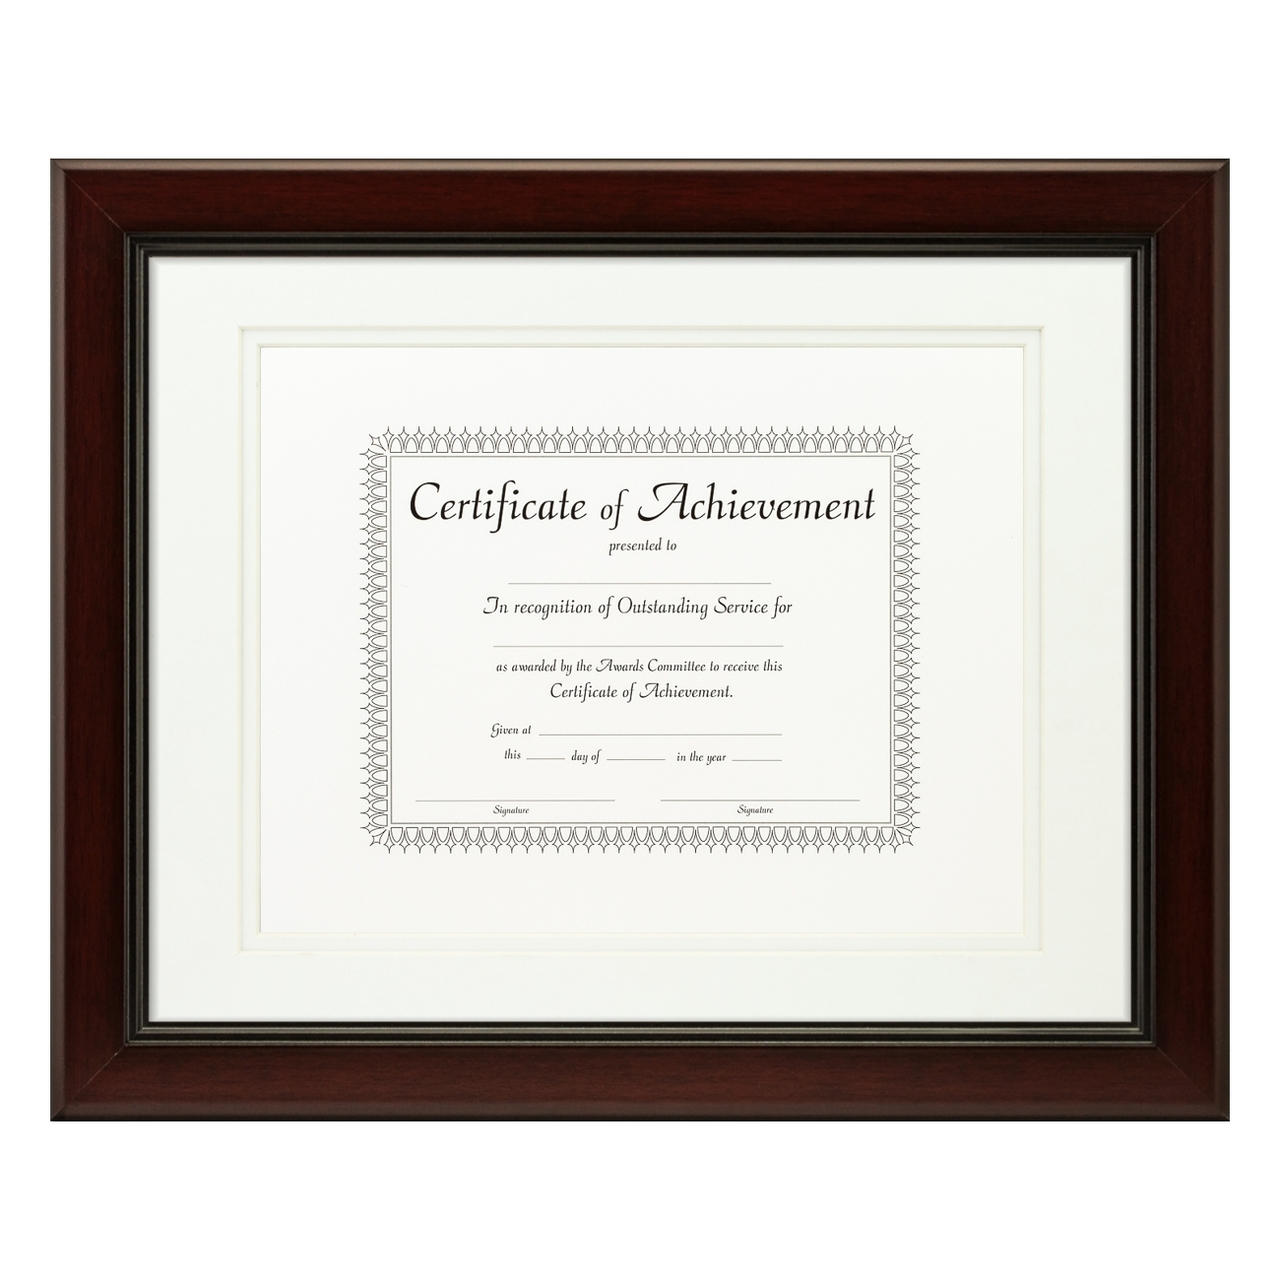 Craig Frames Contemporary Mahogany Red Picture Frame, Set of 4, Size: 12 x 12